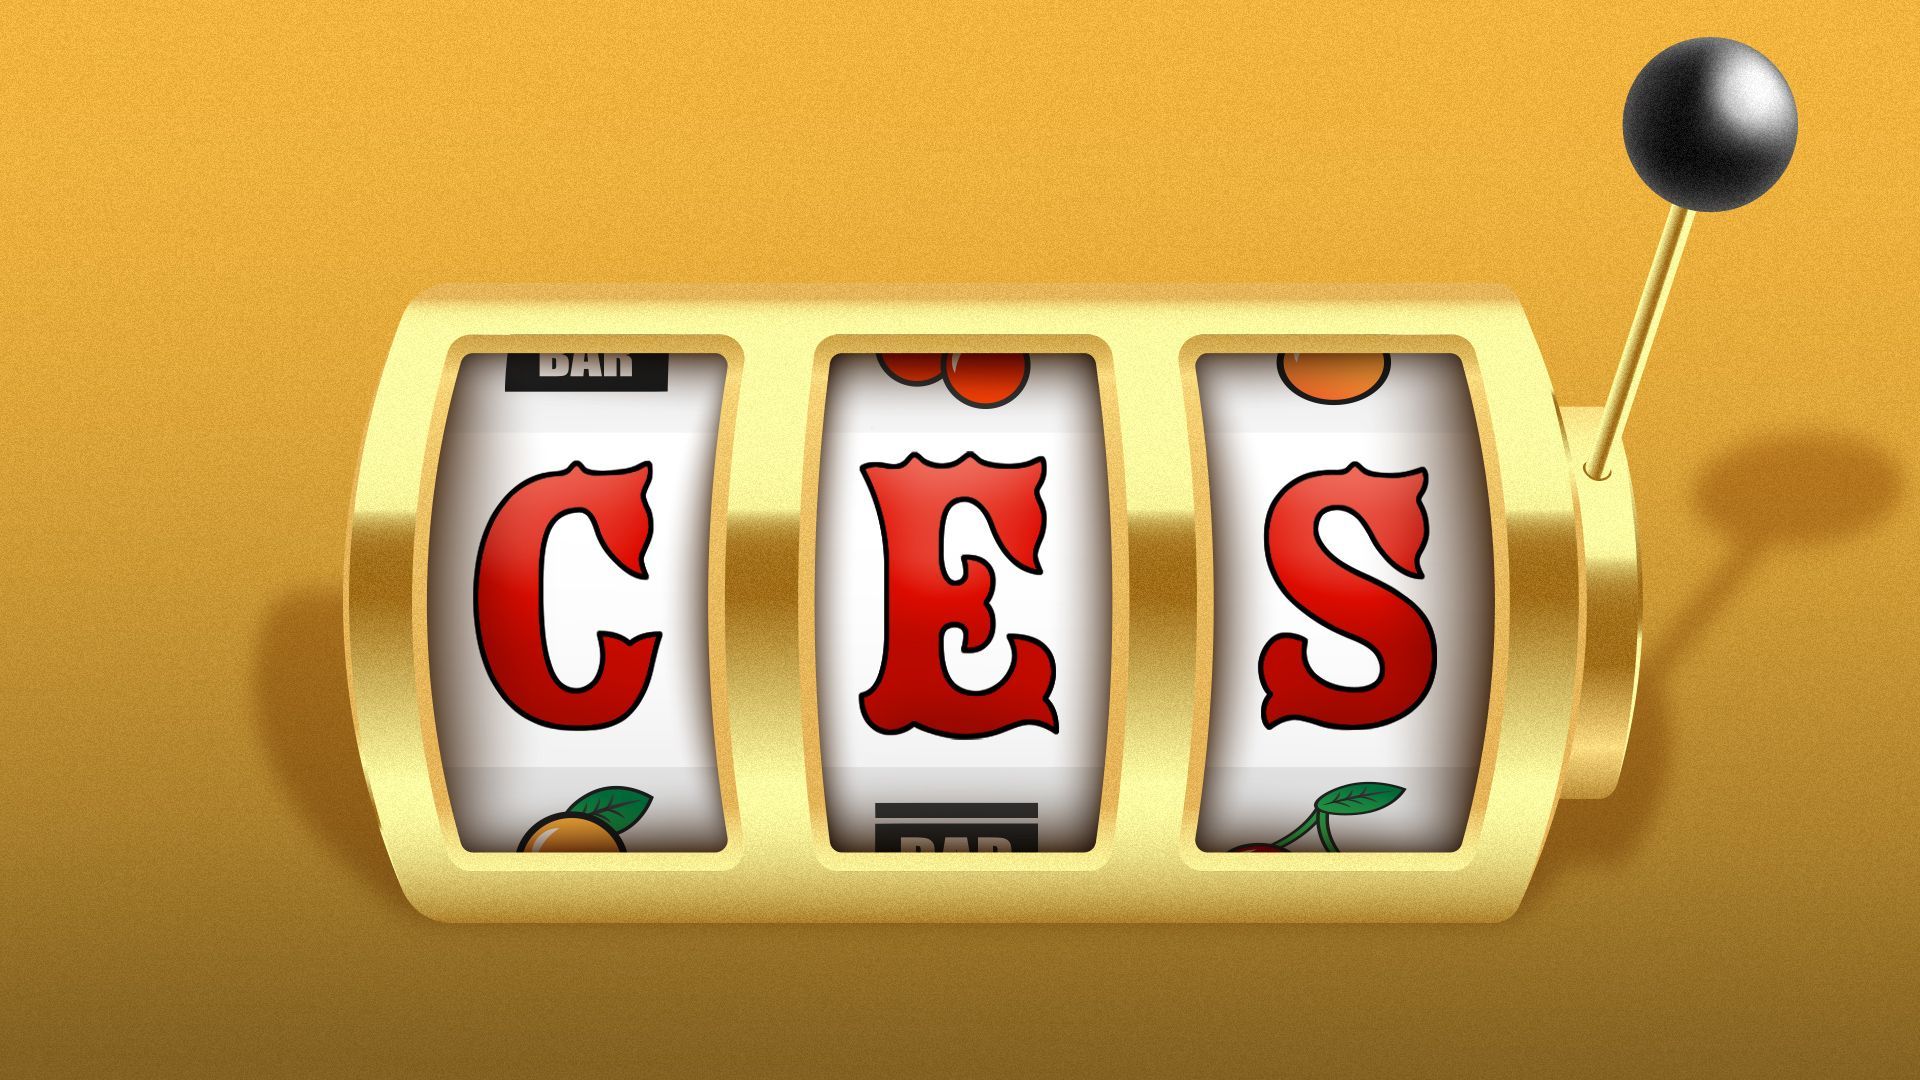 Illustration of a slot machine spelling out "CES"